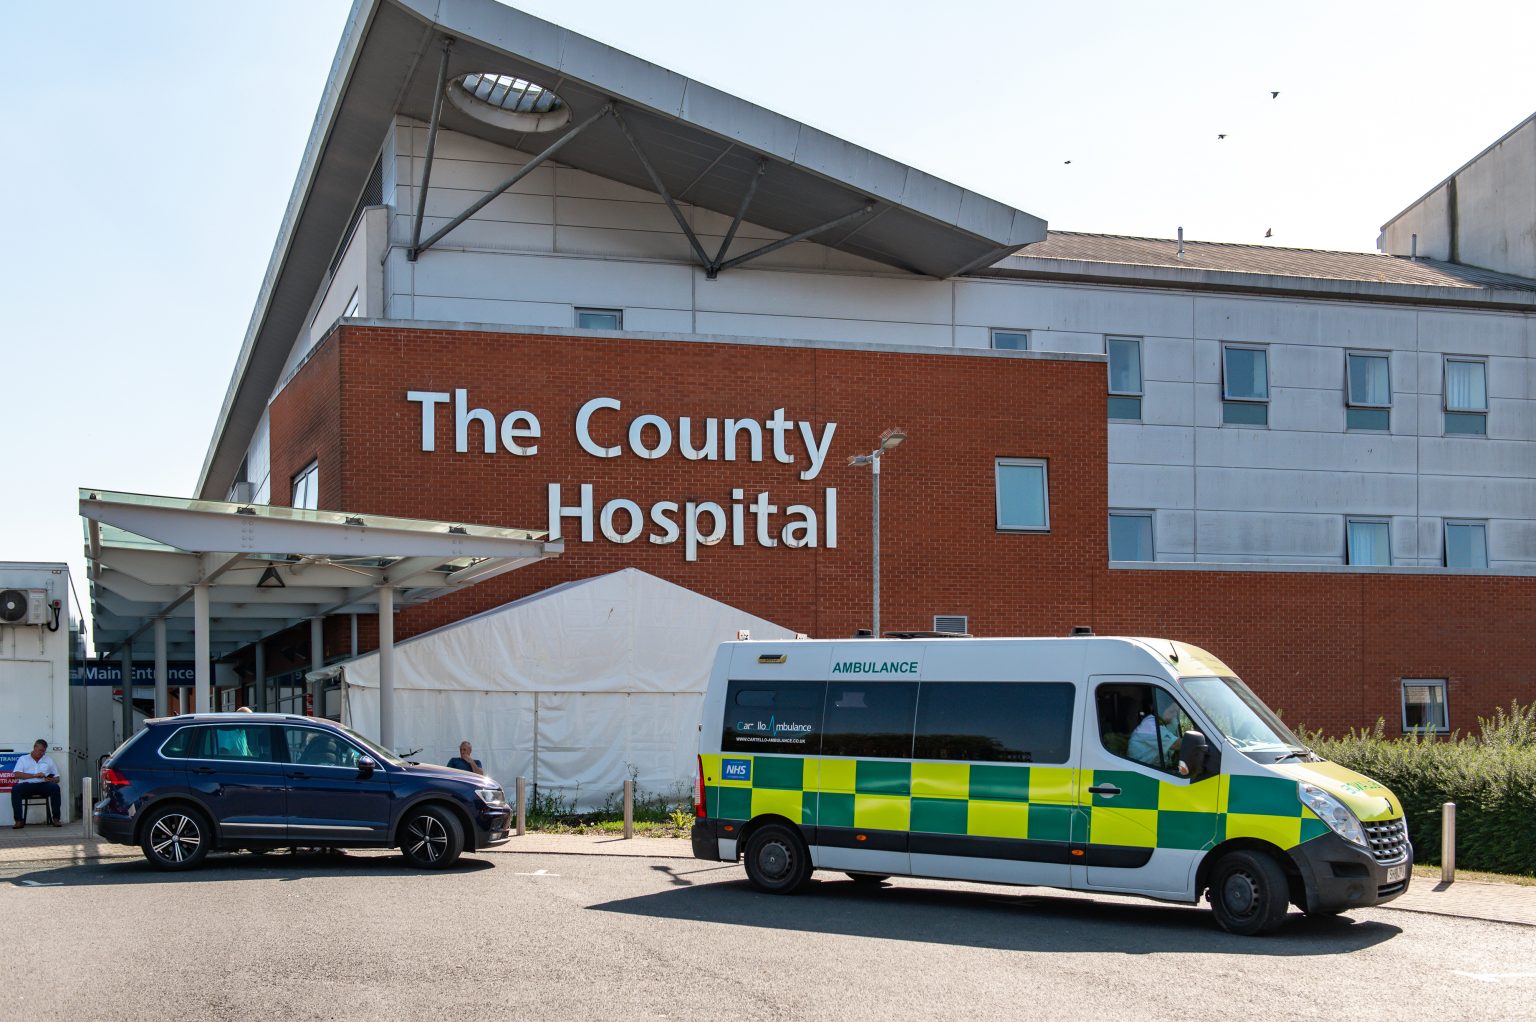 NEWS | The number of patients with COVID-19 at hospital in Herefordshire has increased over recent days